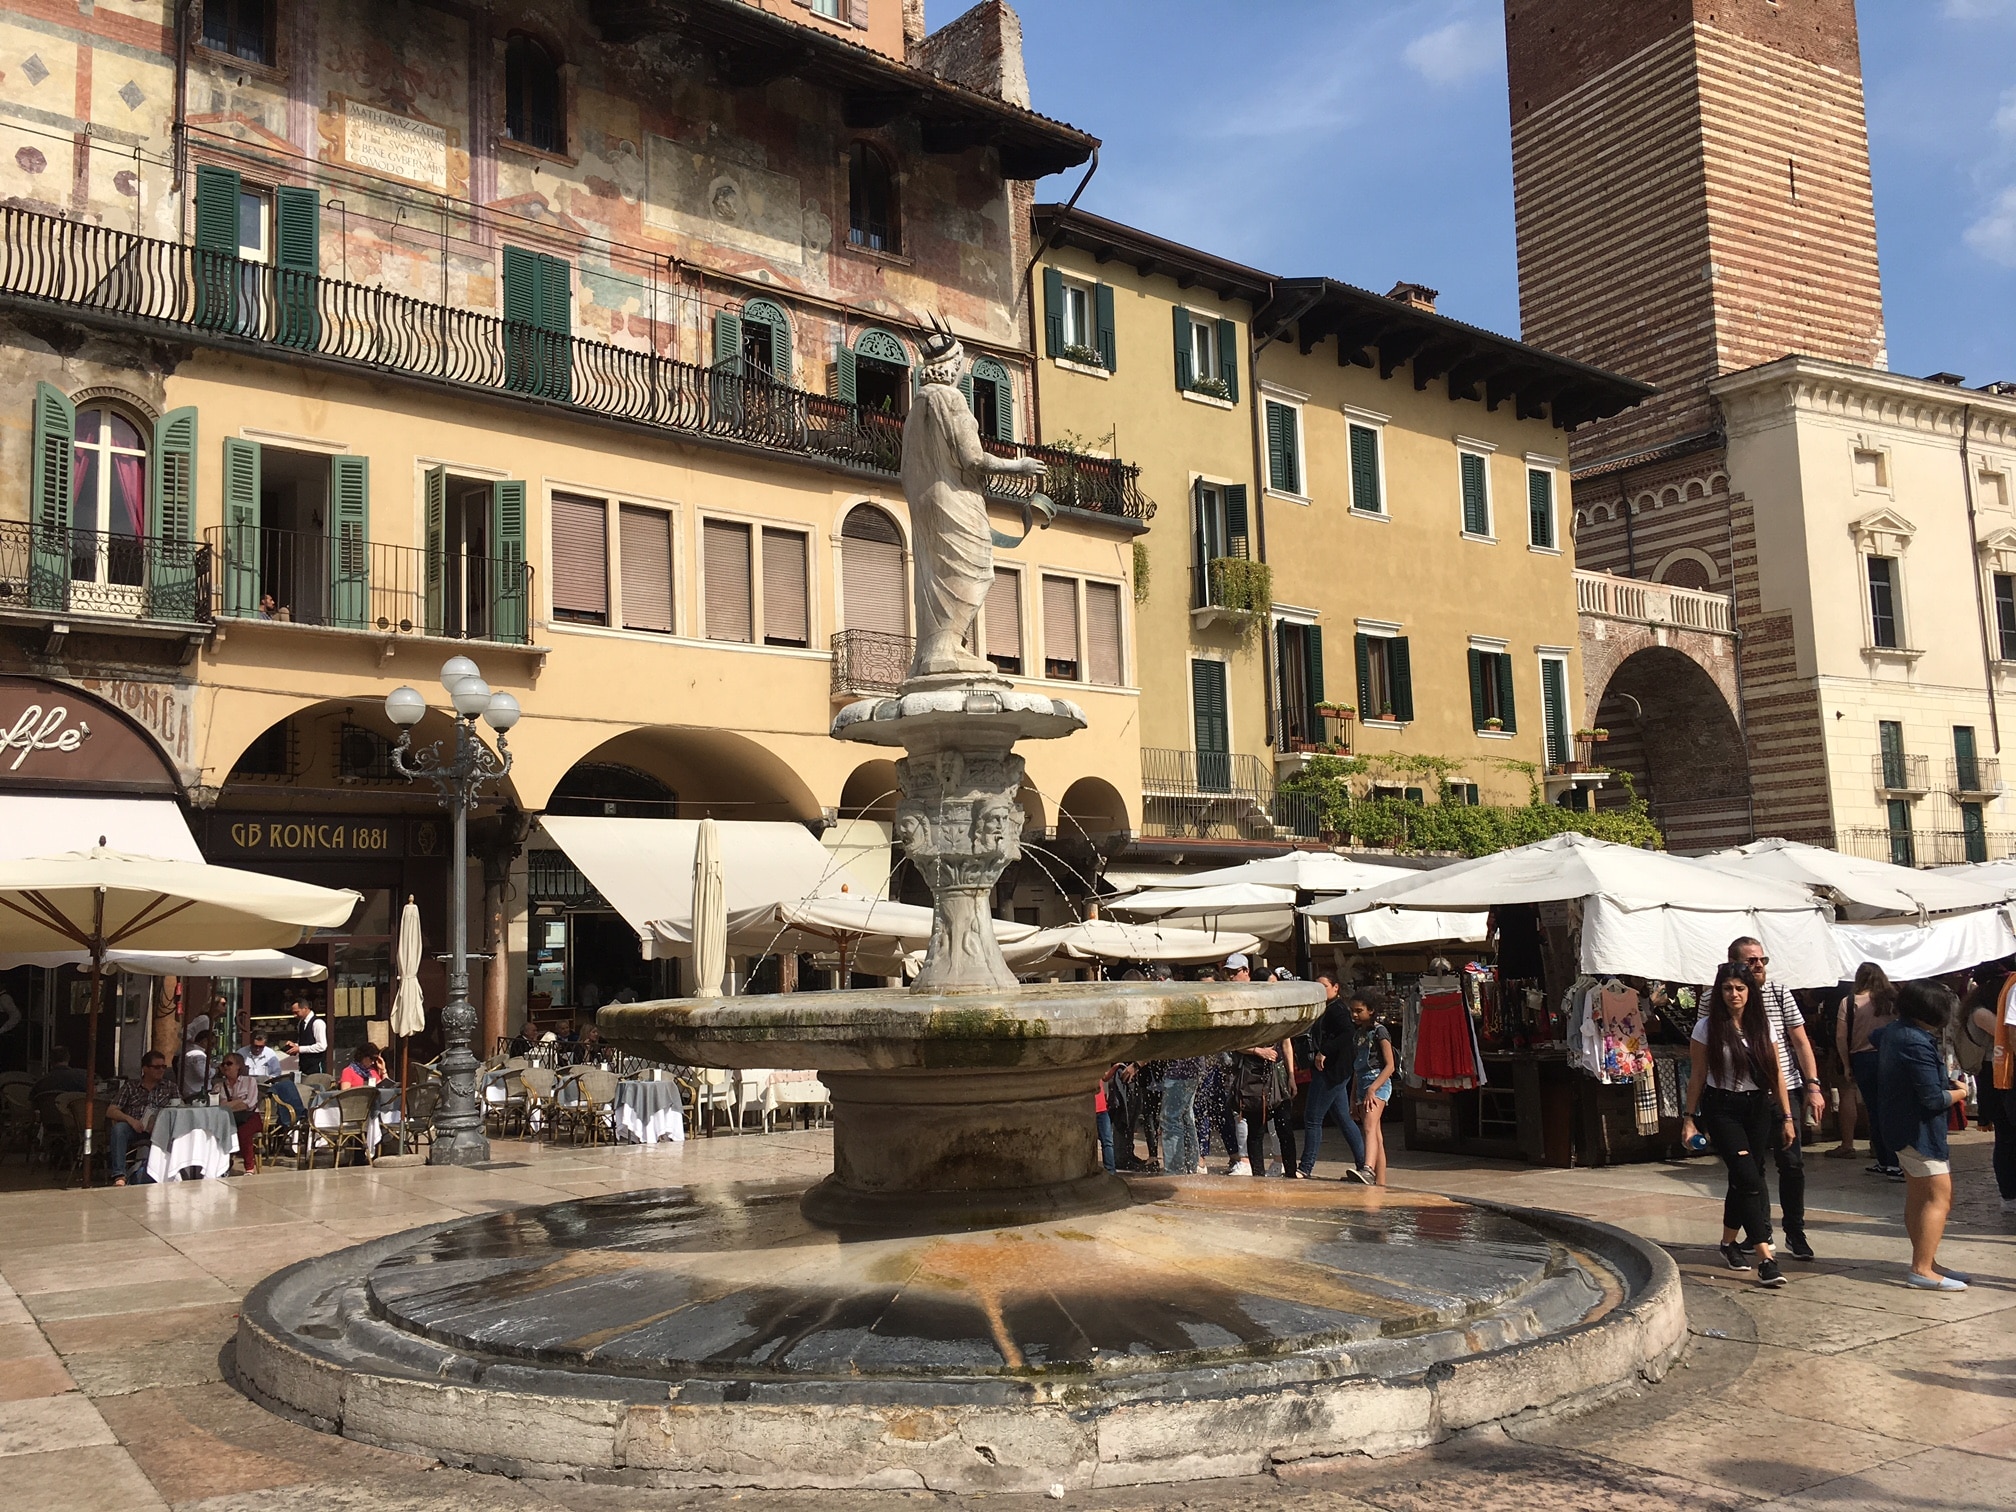 Verona - Piazza Erbe - daily fruit and vegetable market